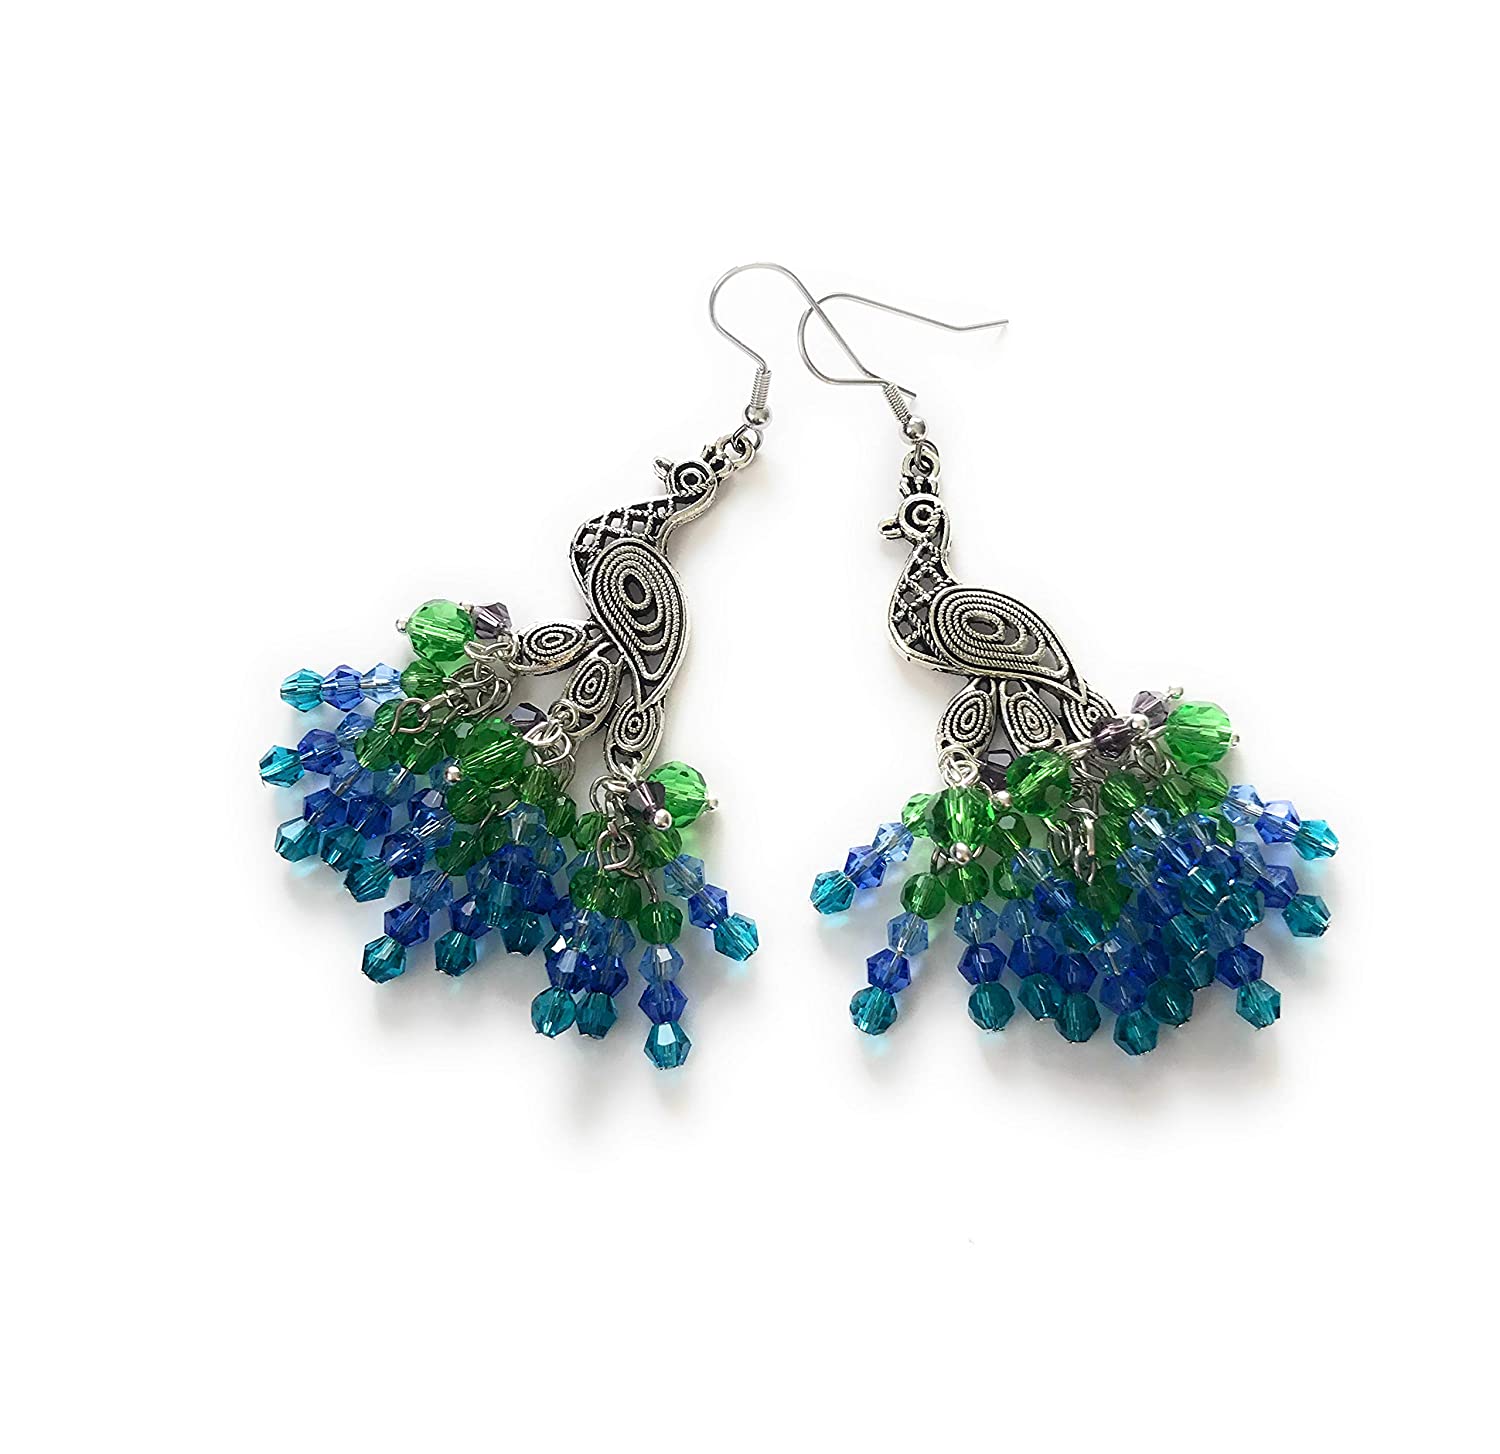 Colorful Peacock Chandelier Earrings at Scott D Jewelry Designs